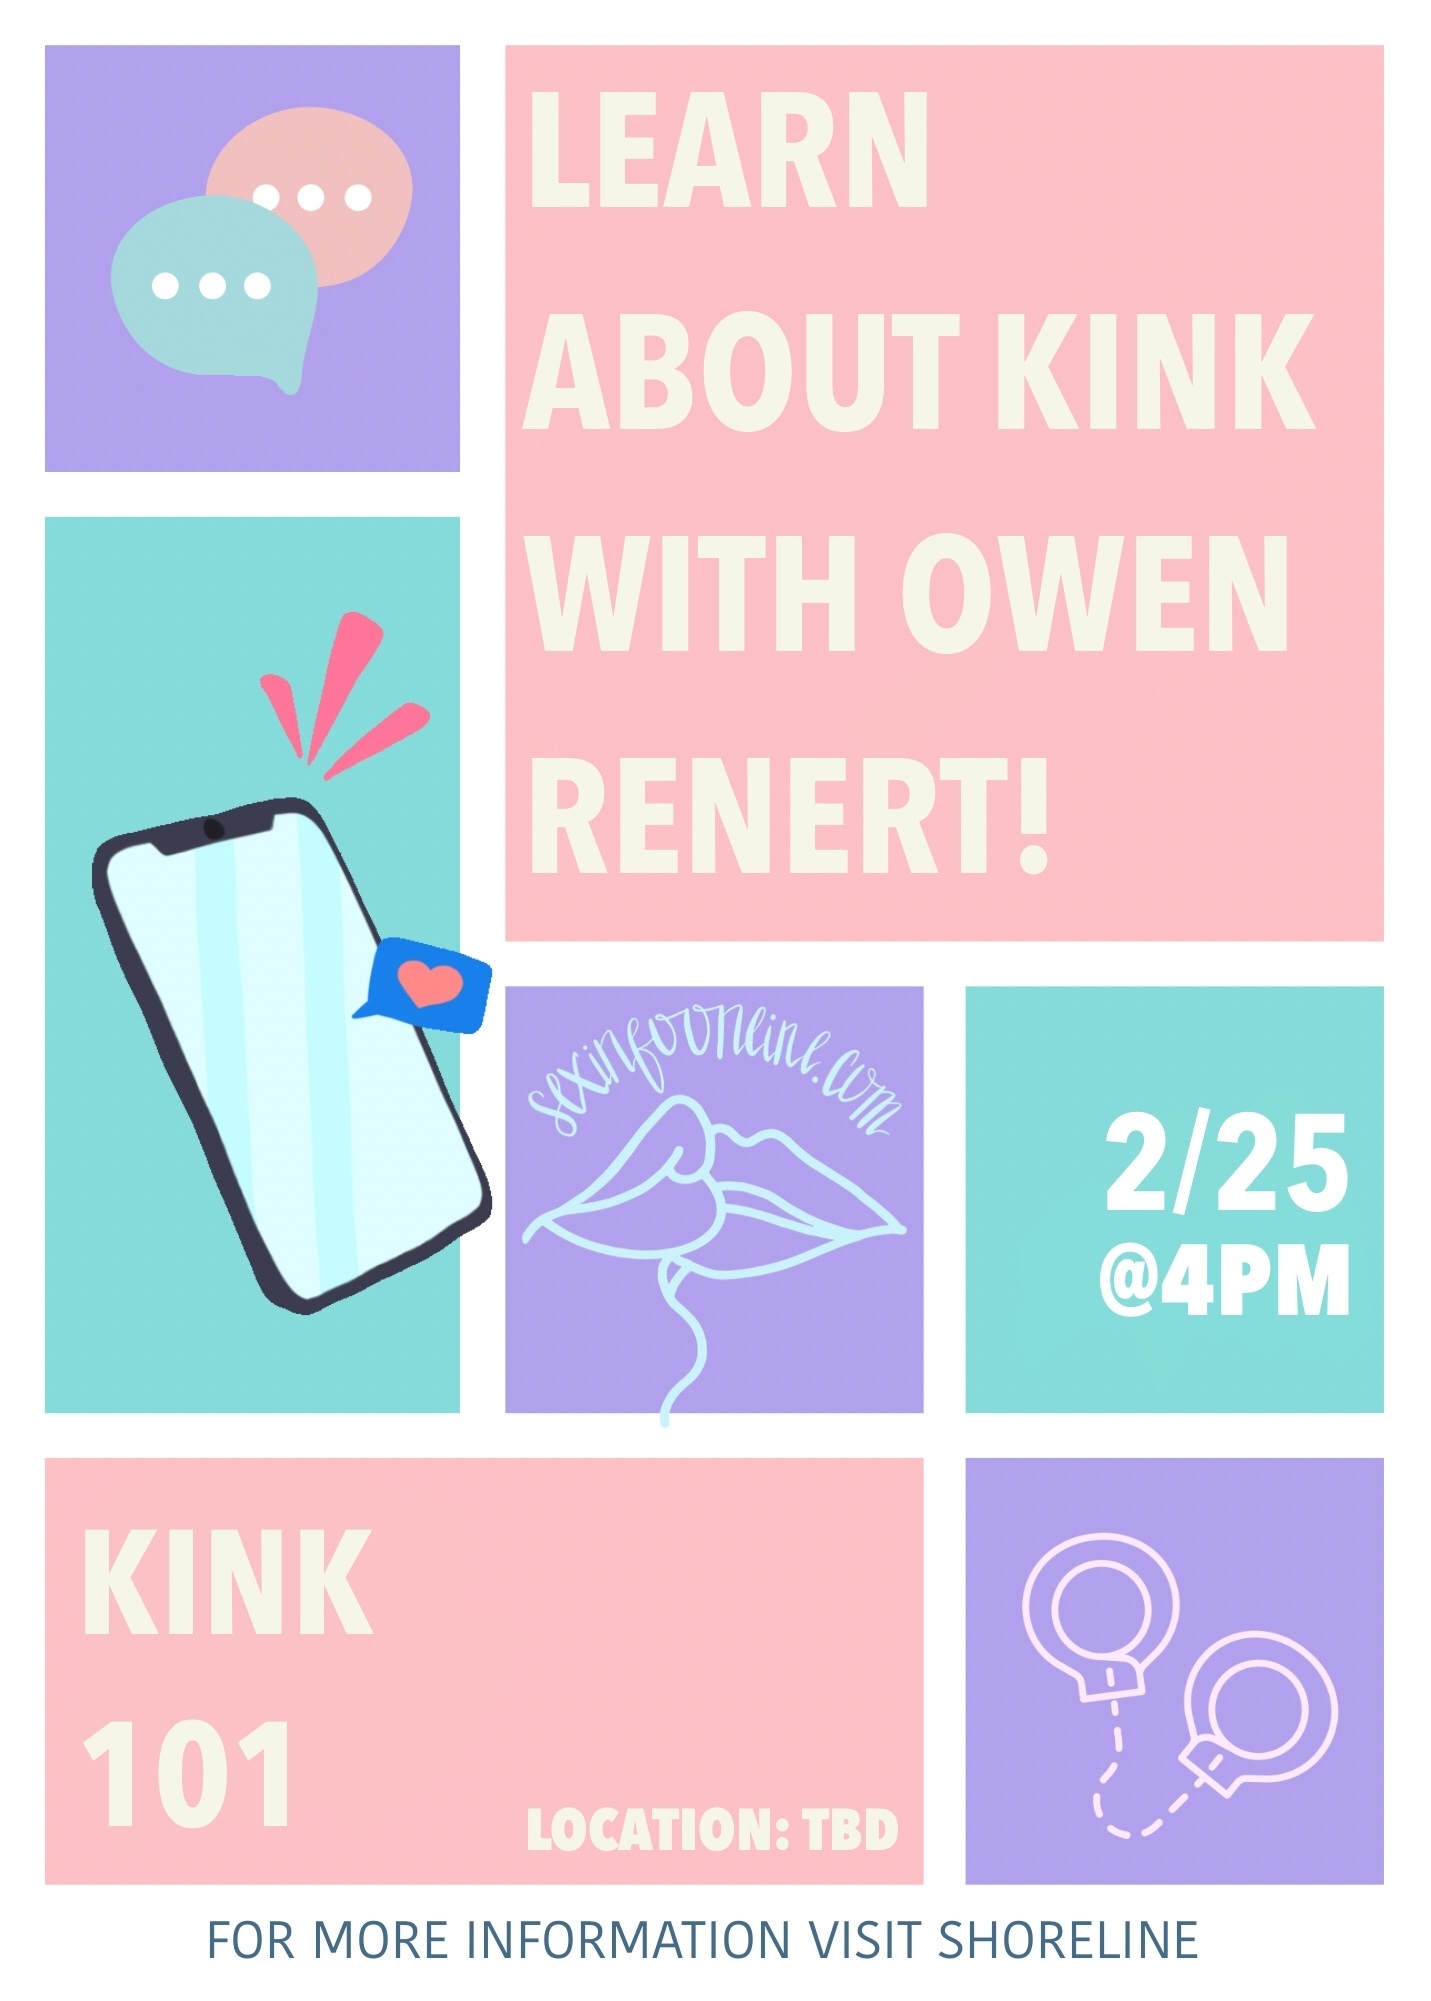 About Kink with Owen Renert